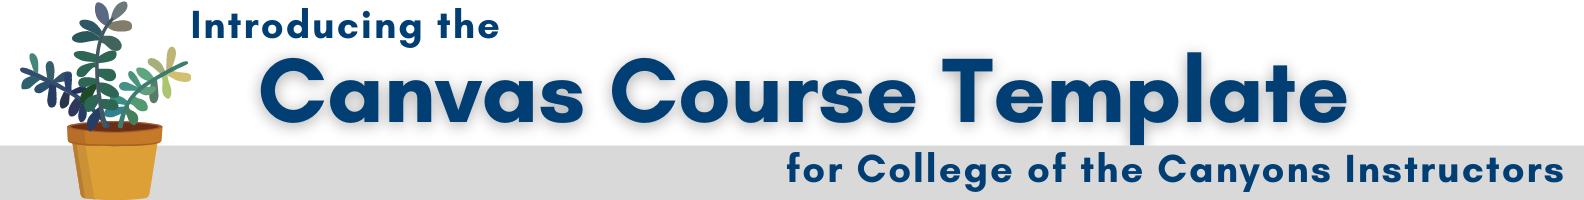 Introducing the Canvas Course Template for College of the Canyons Instructors